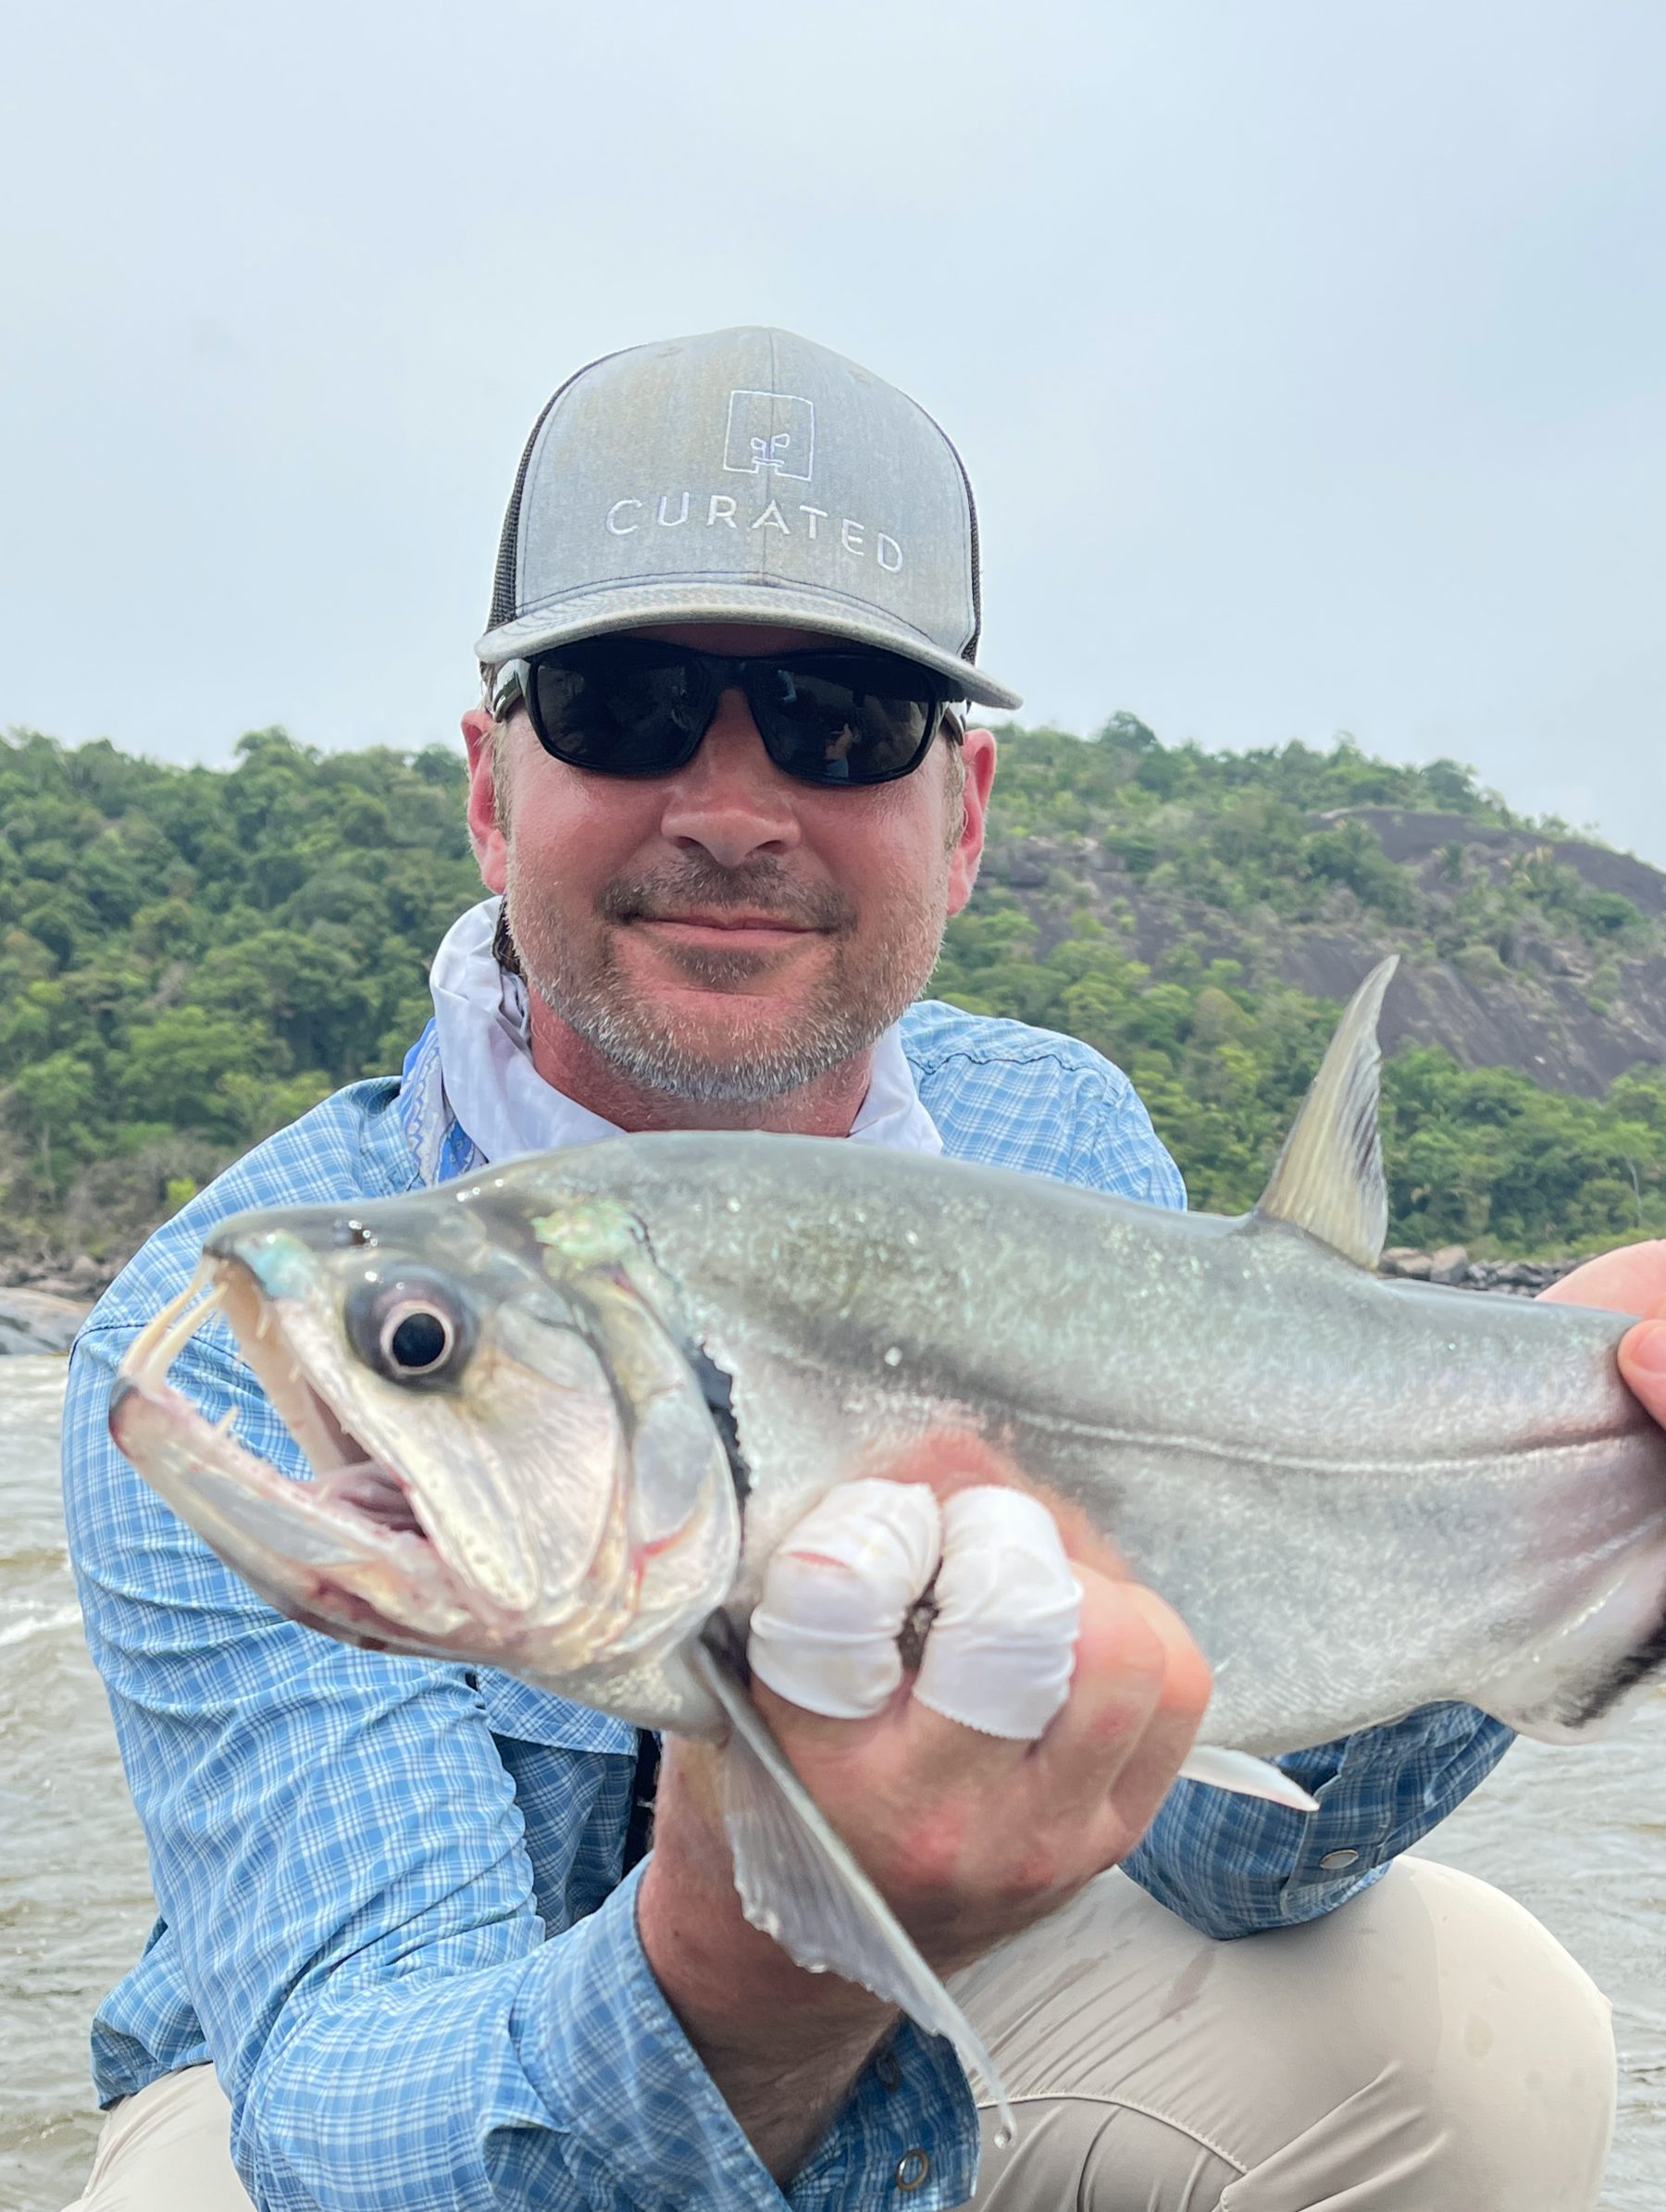 Fly fishing for large mouth bass with Kermit Bass Poppers — Red's Fly Shop